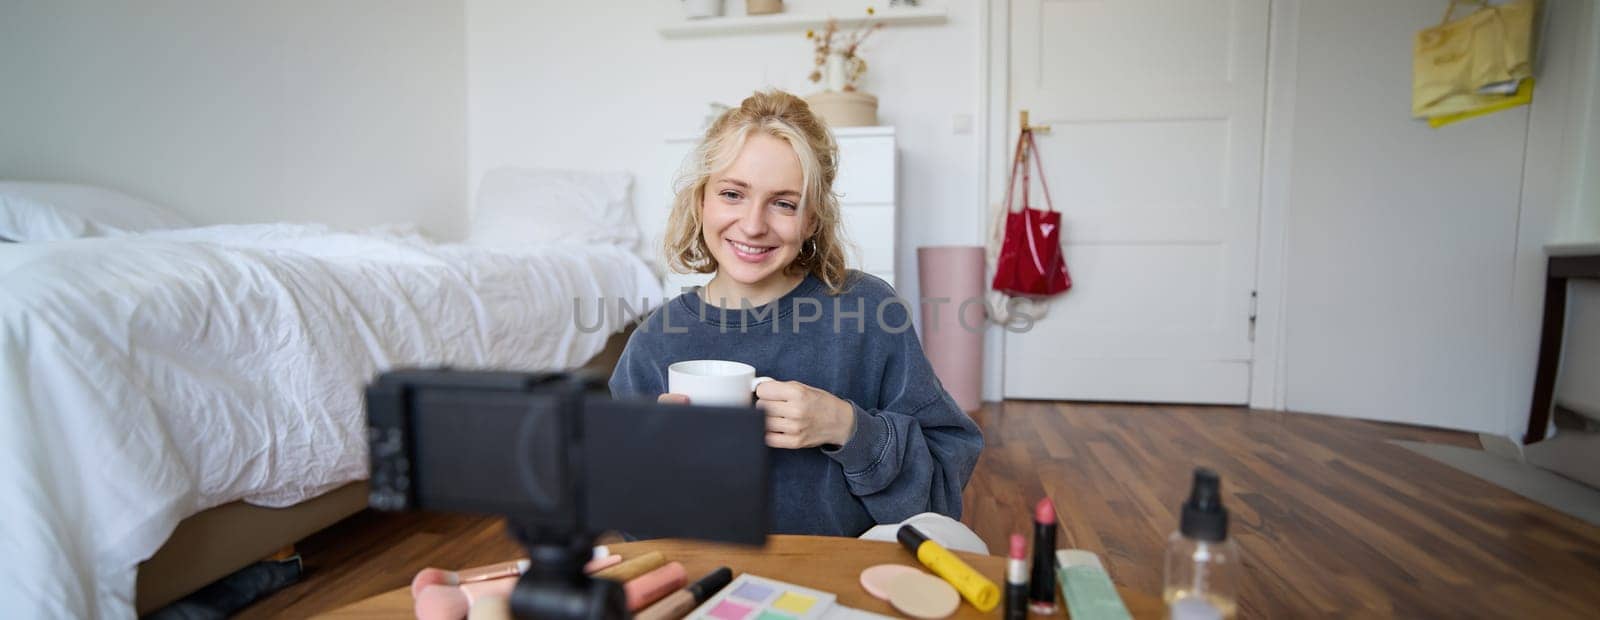 Portrait of young lifestyle blogger, woman sitting in bedroom and talking at digital camera, drinking tea, recording a vlog. Lifestyle content creation